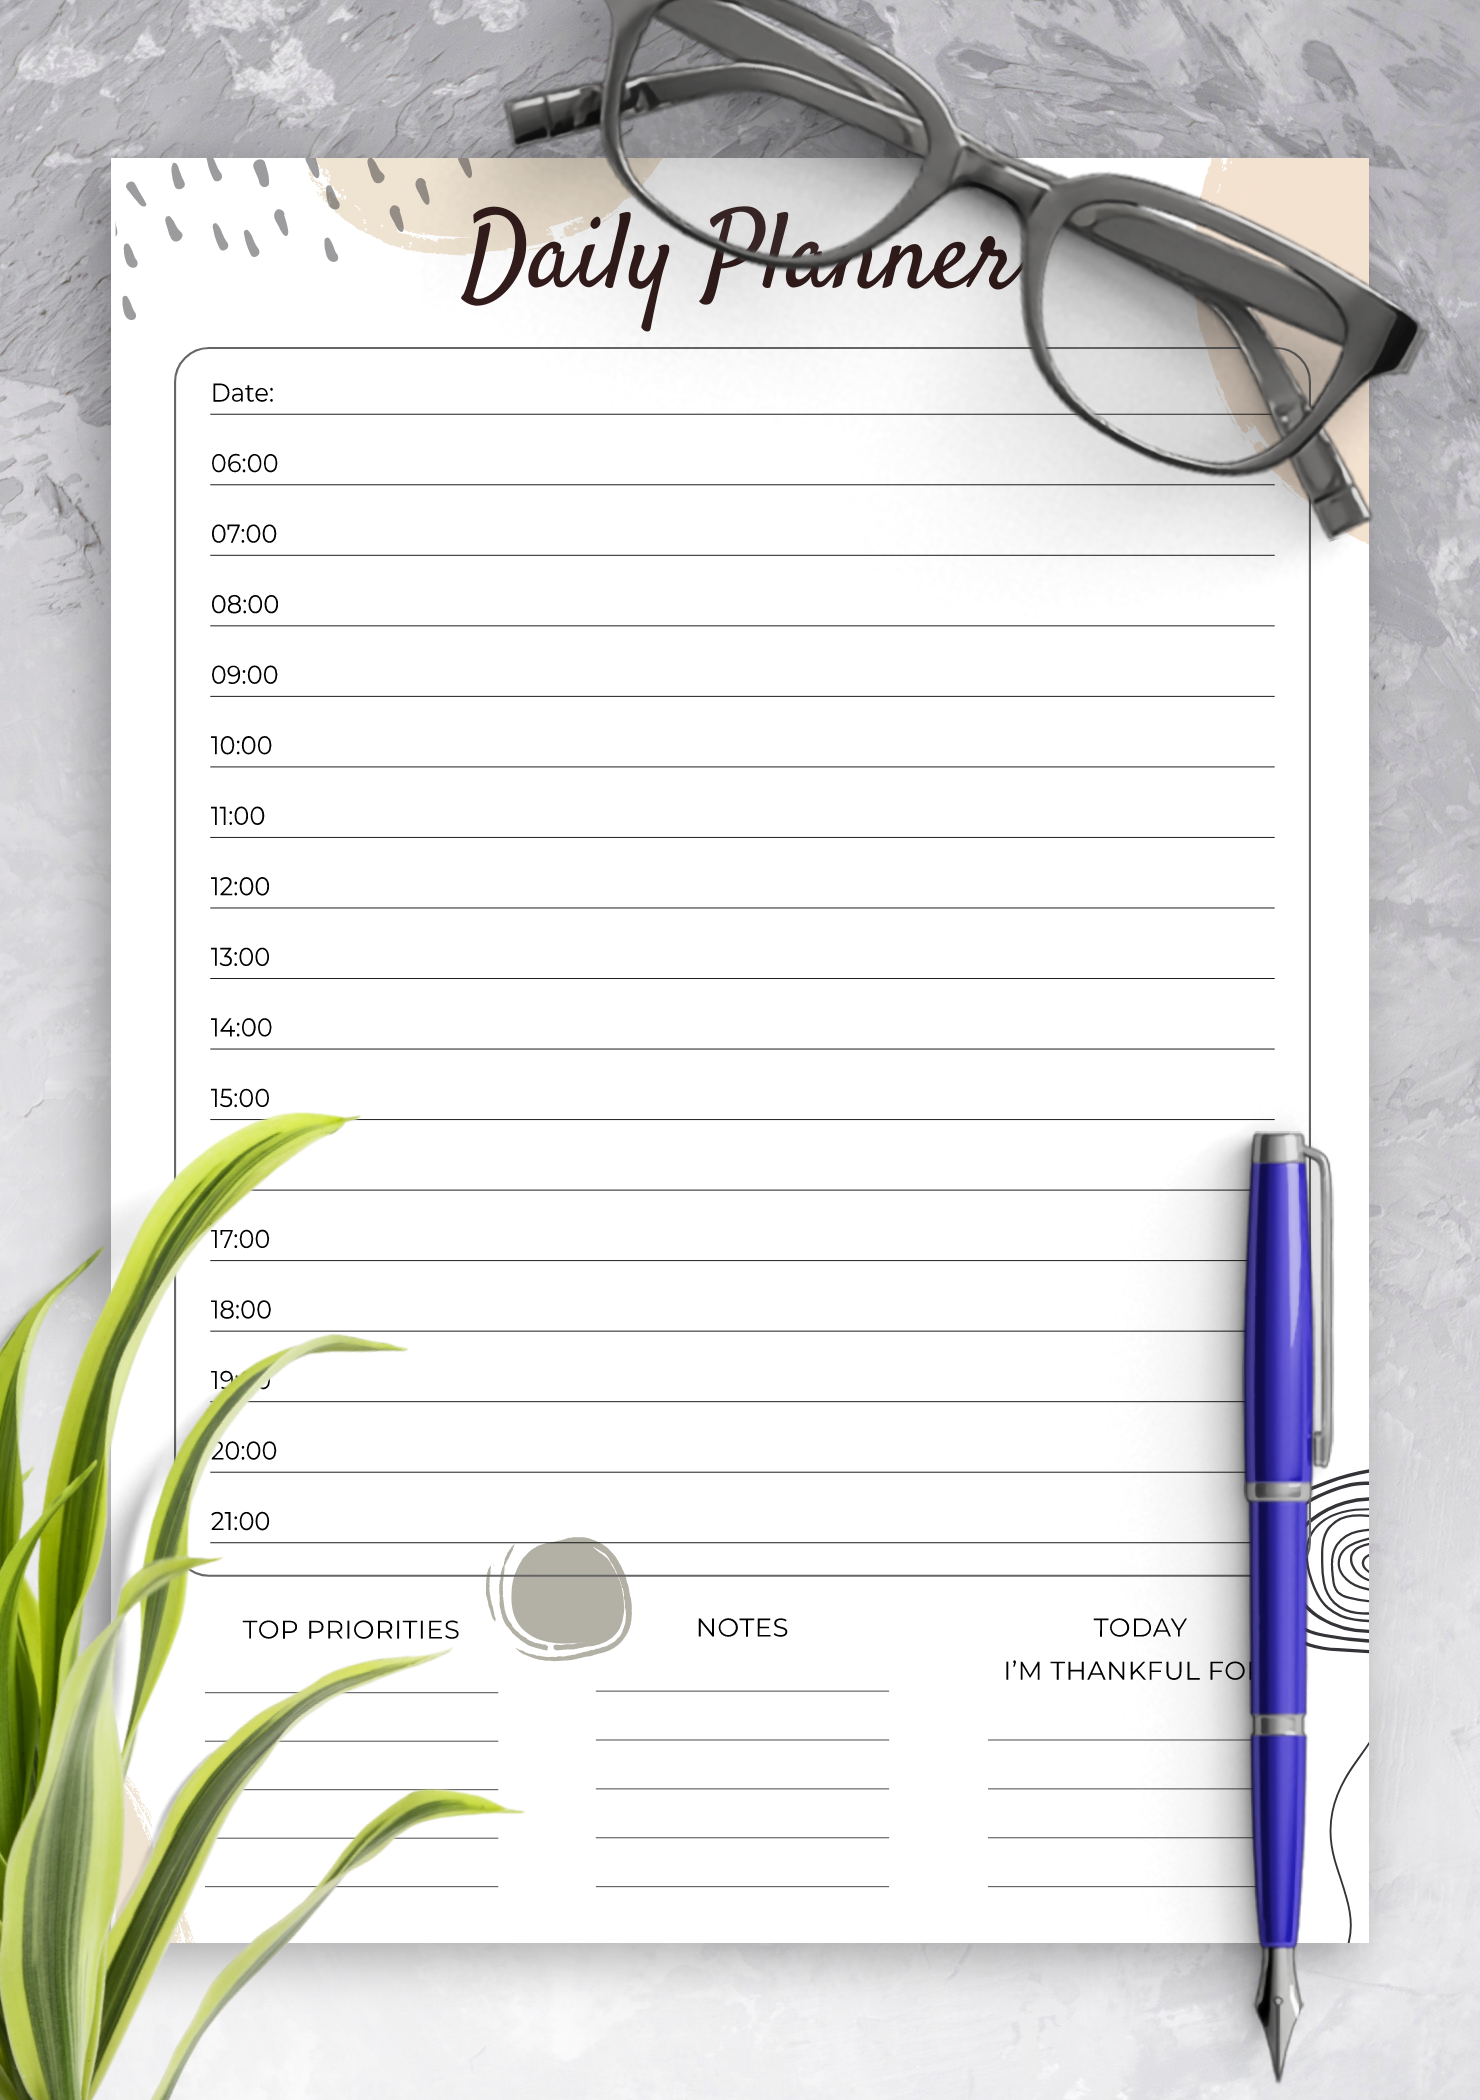 Daily Planner With Time Slots Free Printable